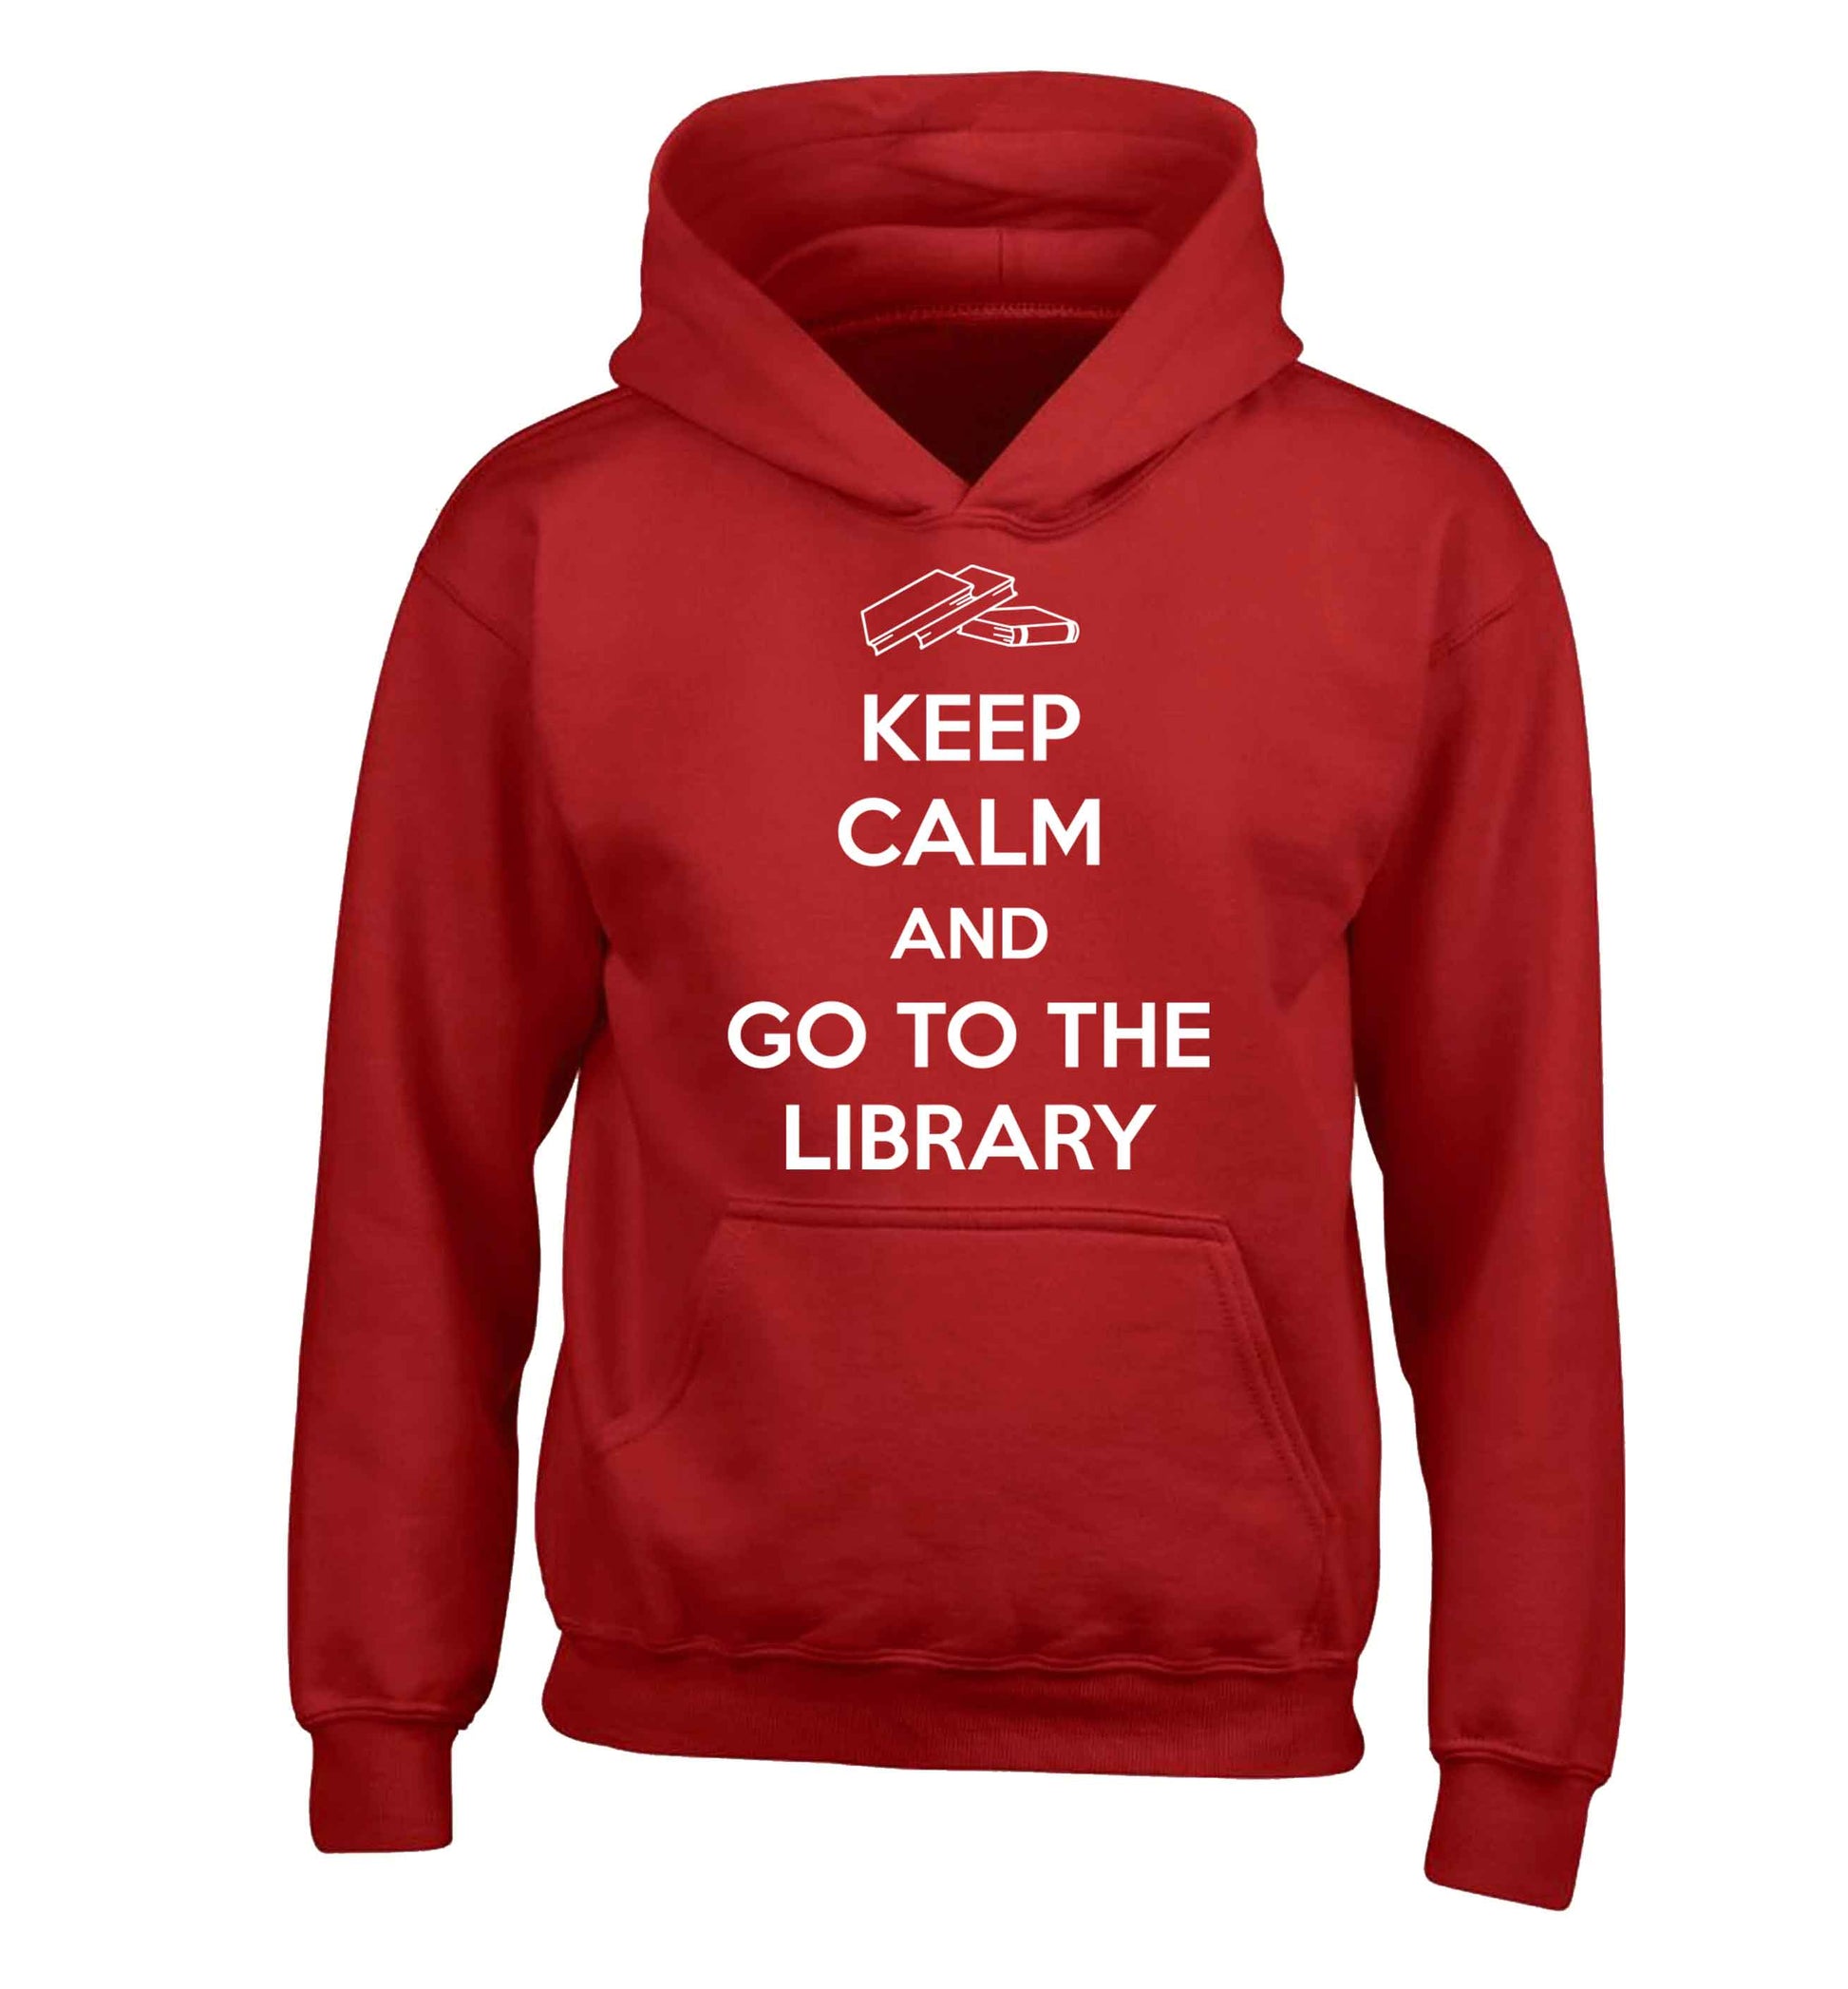 Keep calm and go to the library children's red hoodie 12-13 Years